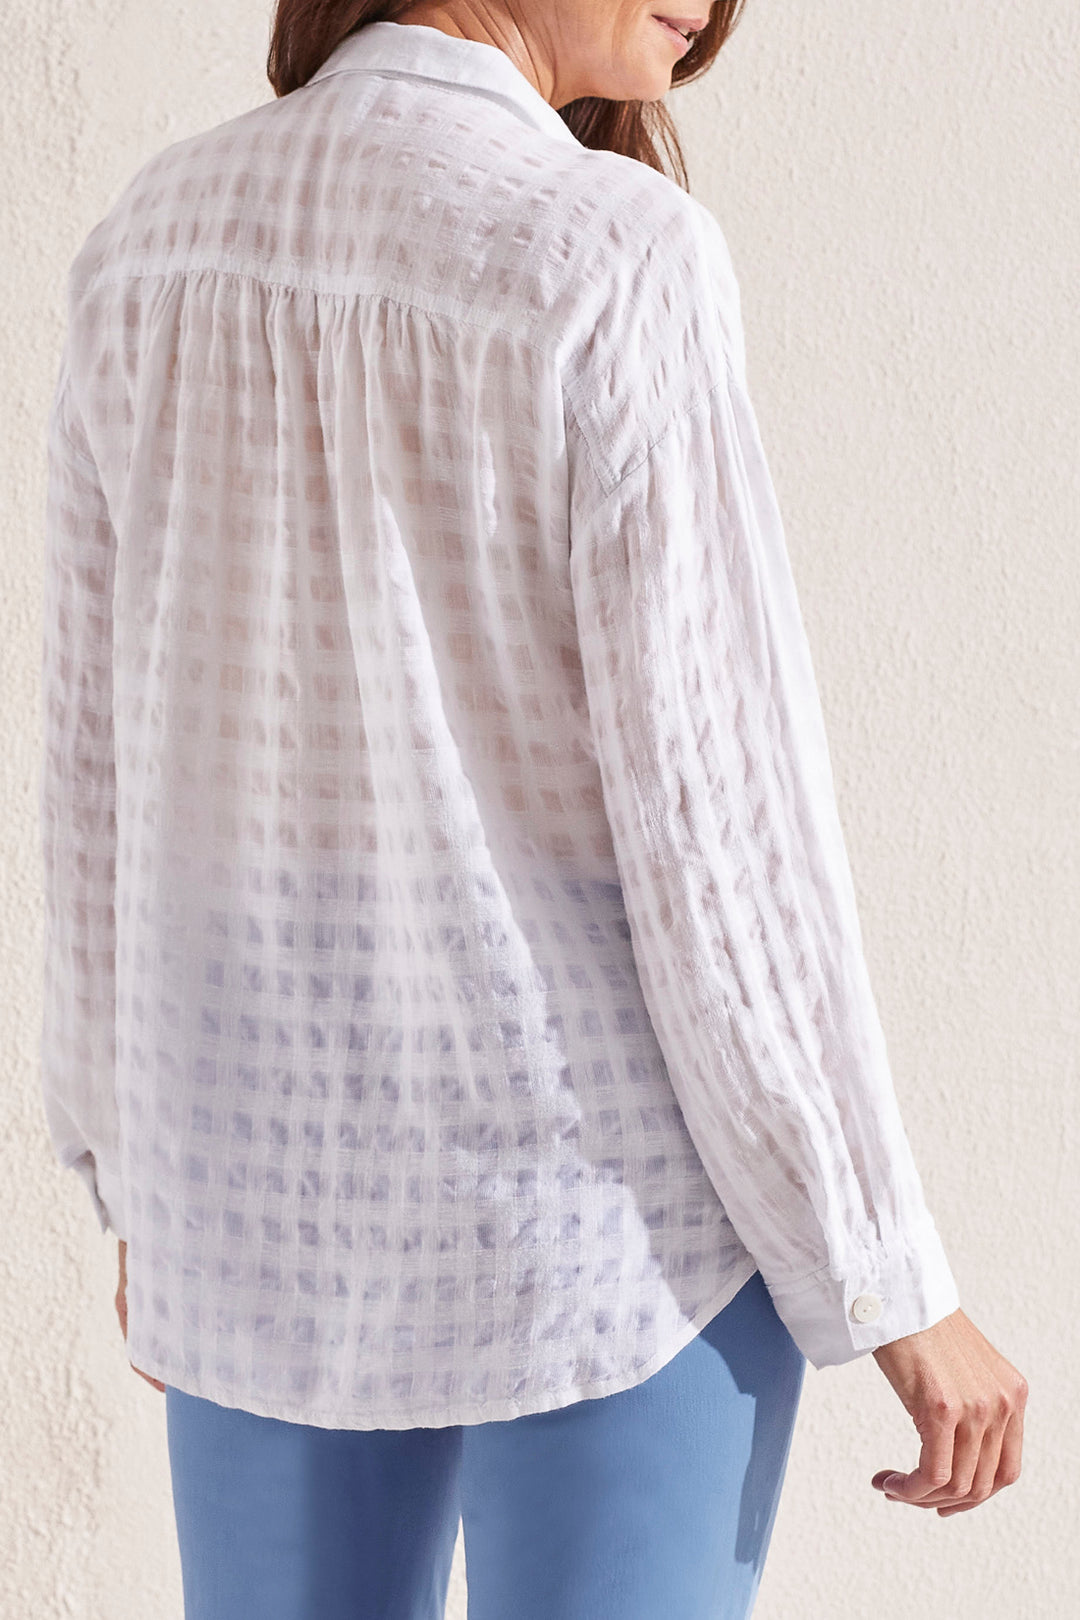 LONG SLEEVE BUTTON FRONT BLOUSE - WHITE